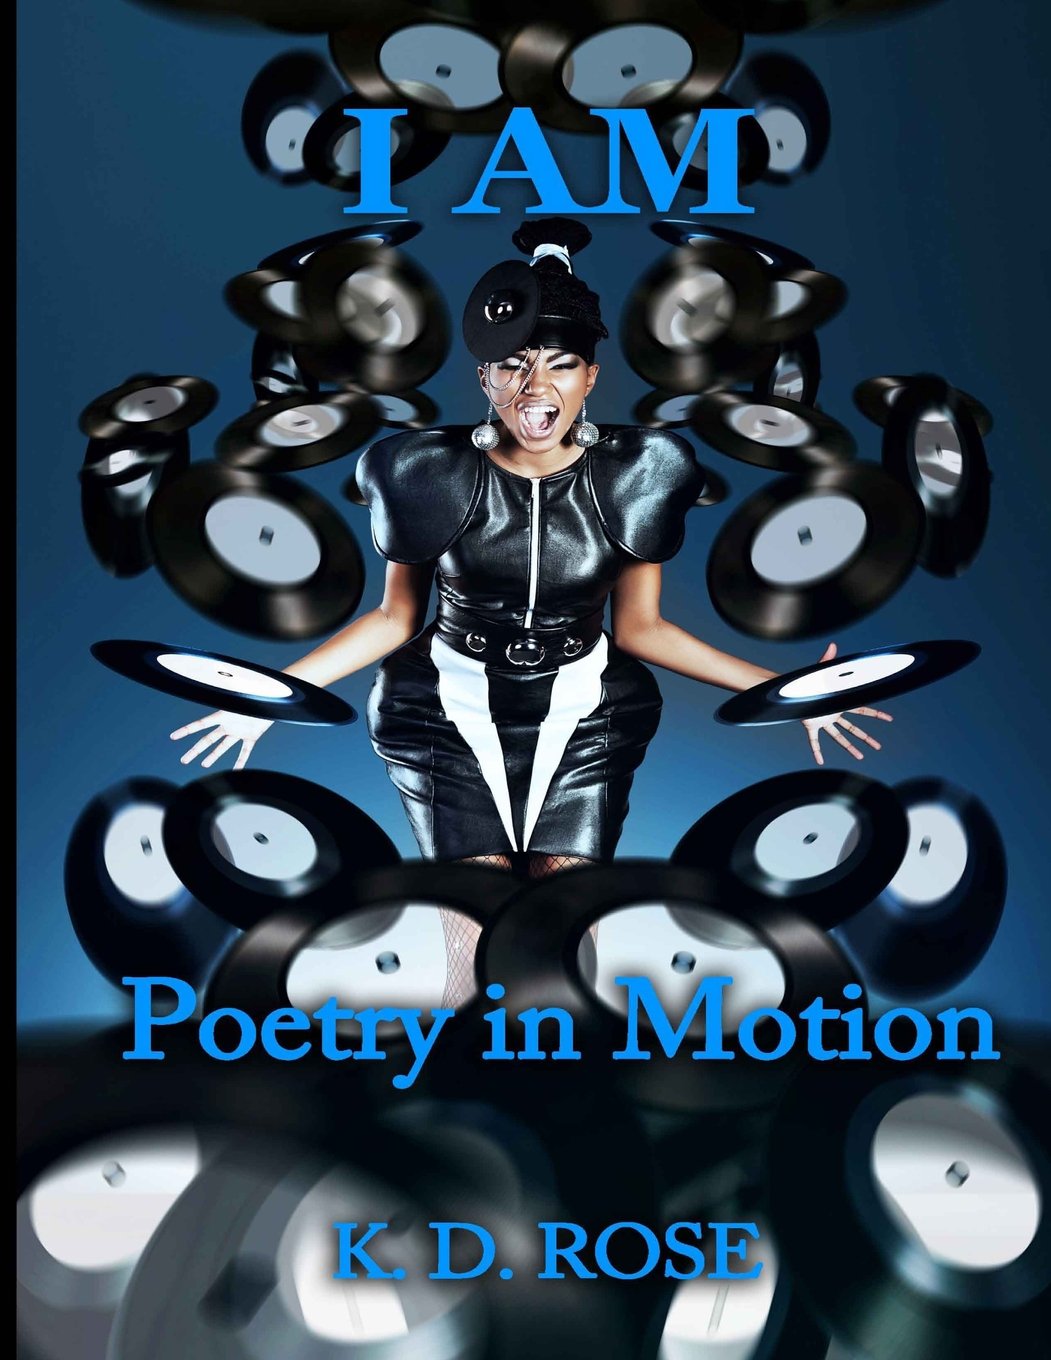 I AM (Poetry in Motion) by K.D. Rose